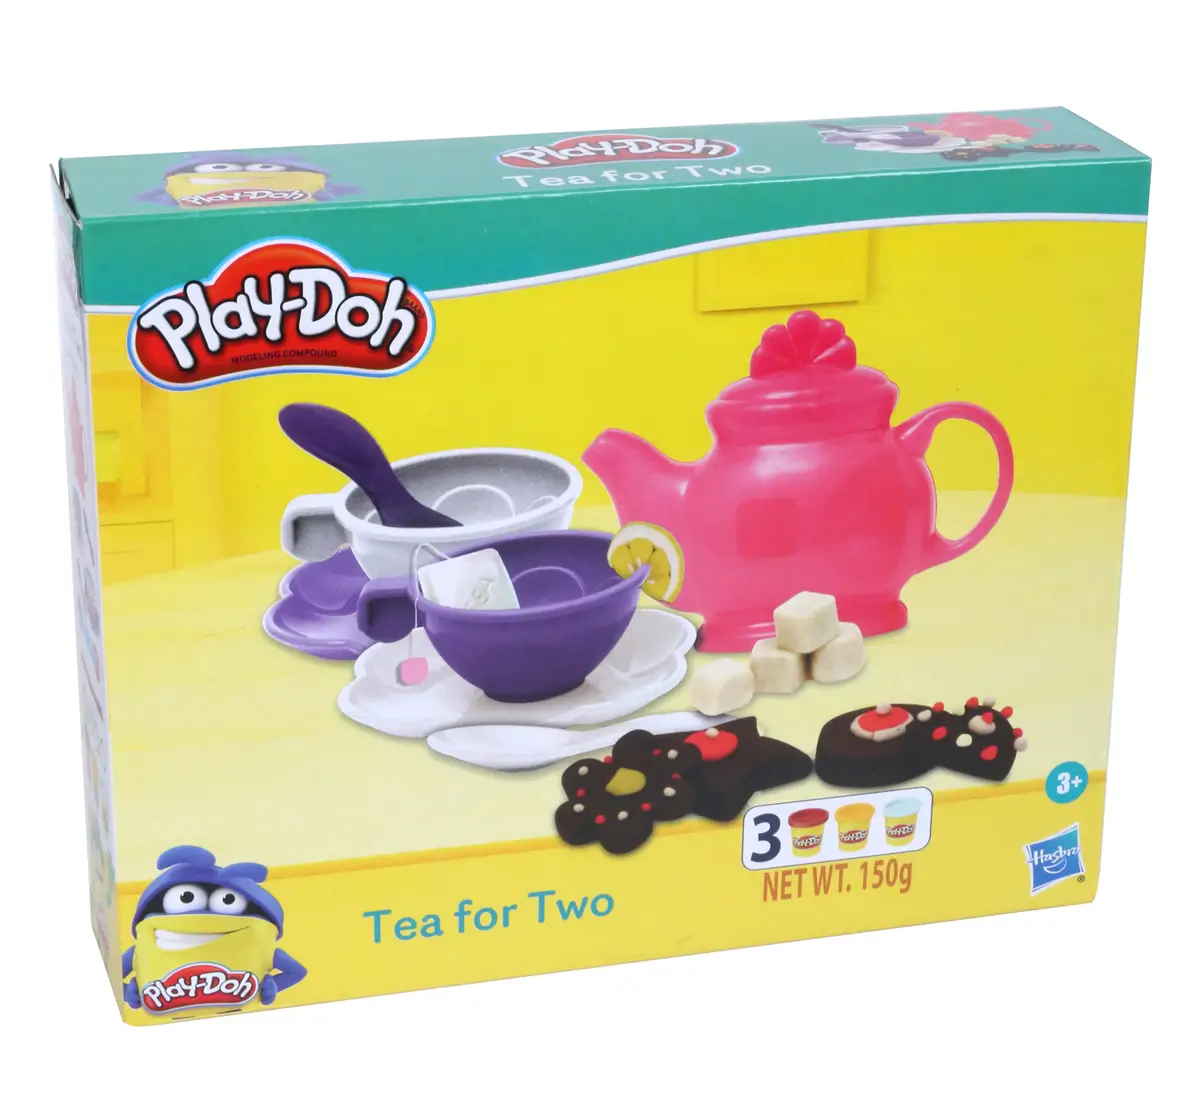 Play Doh Tea for Two Playset for Kids 3Y+, Multicolour